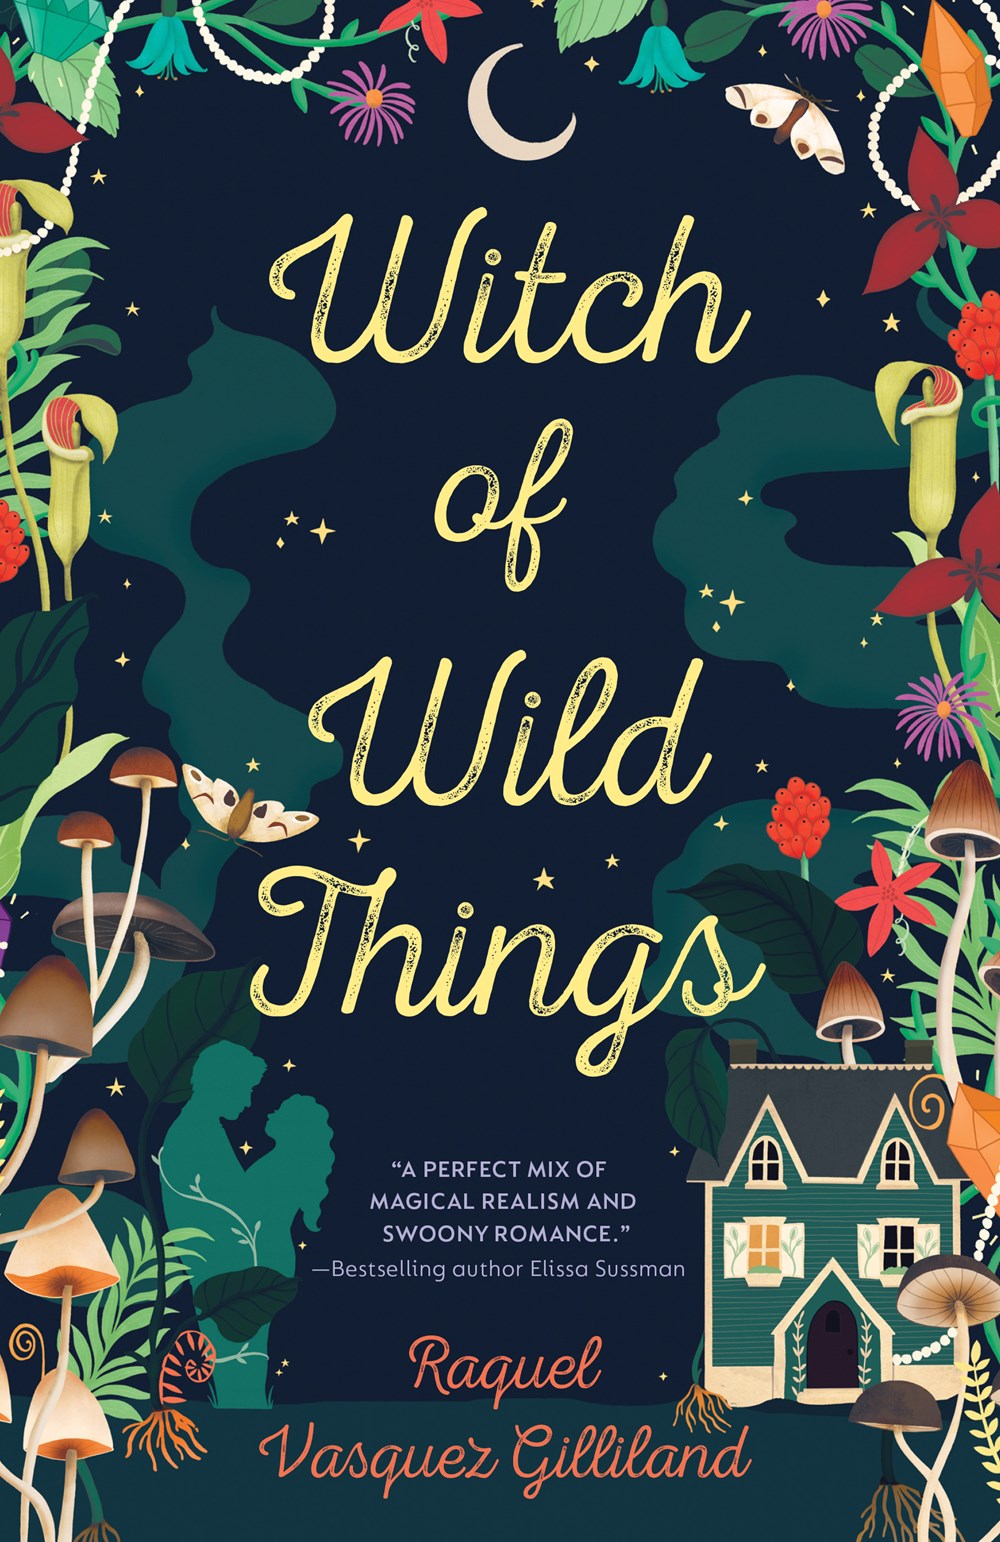 https://www.libraryjournal.com/binaries/content/gallery/witchofwildthings_gilliland.jpg